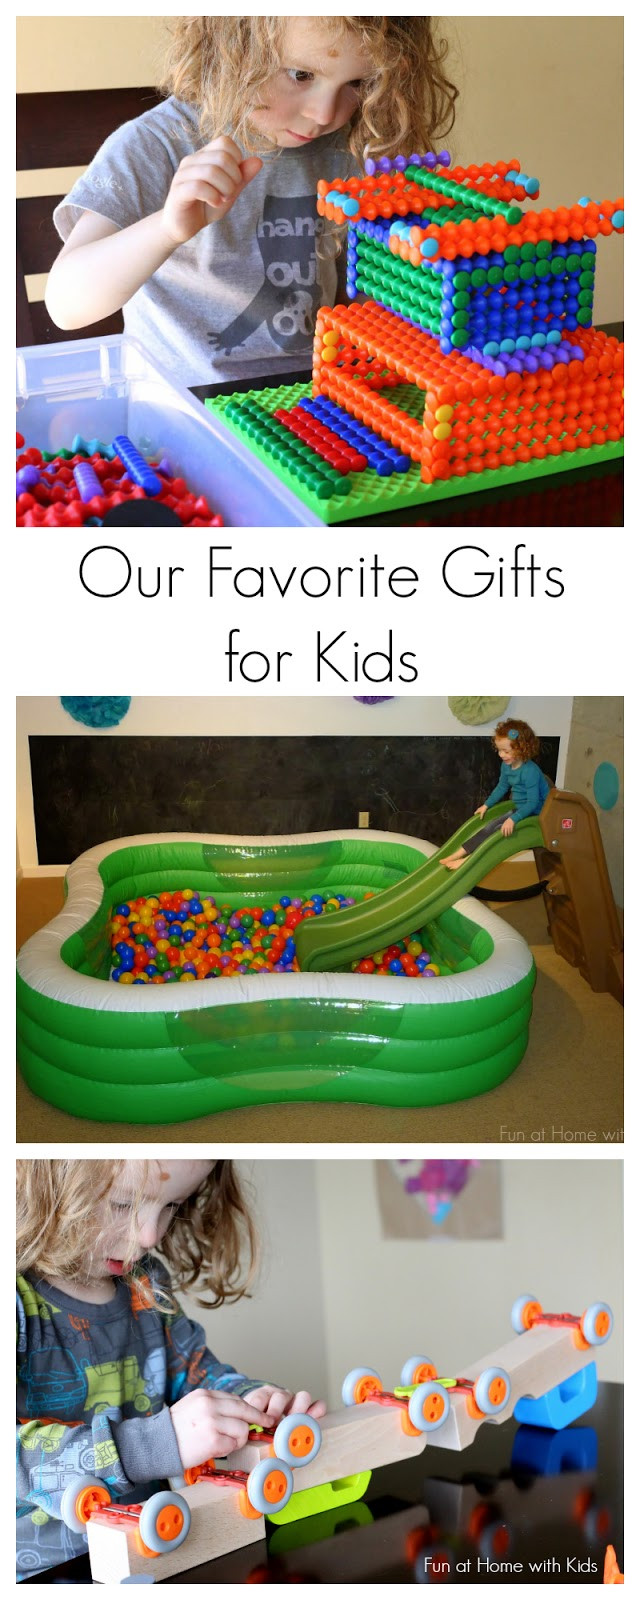 Unique Kids Gift
 Our 10 Best and Favorite Gift Ideas for Kids